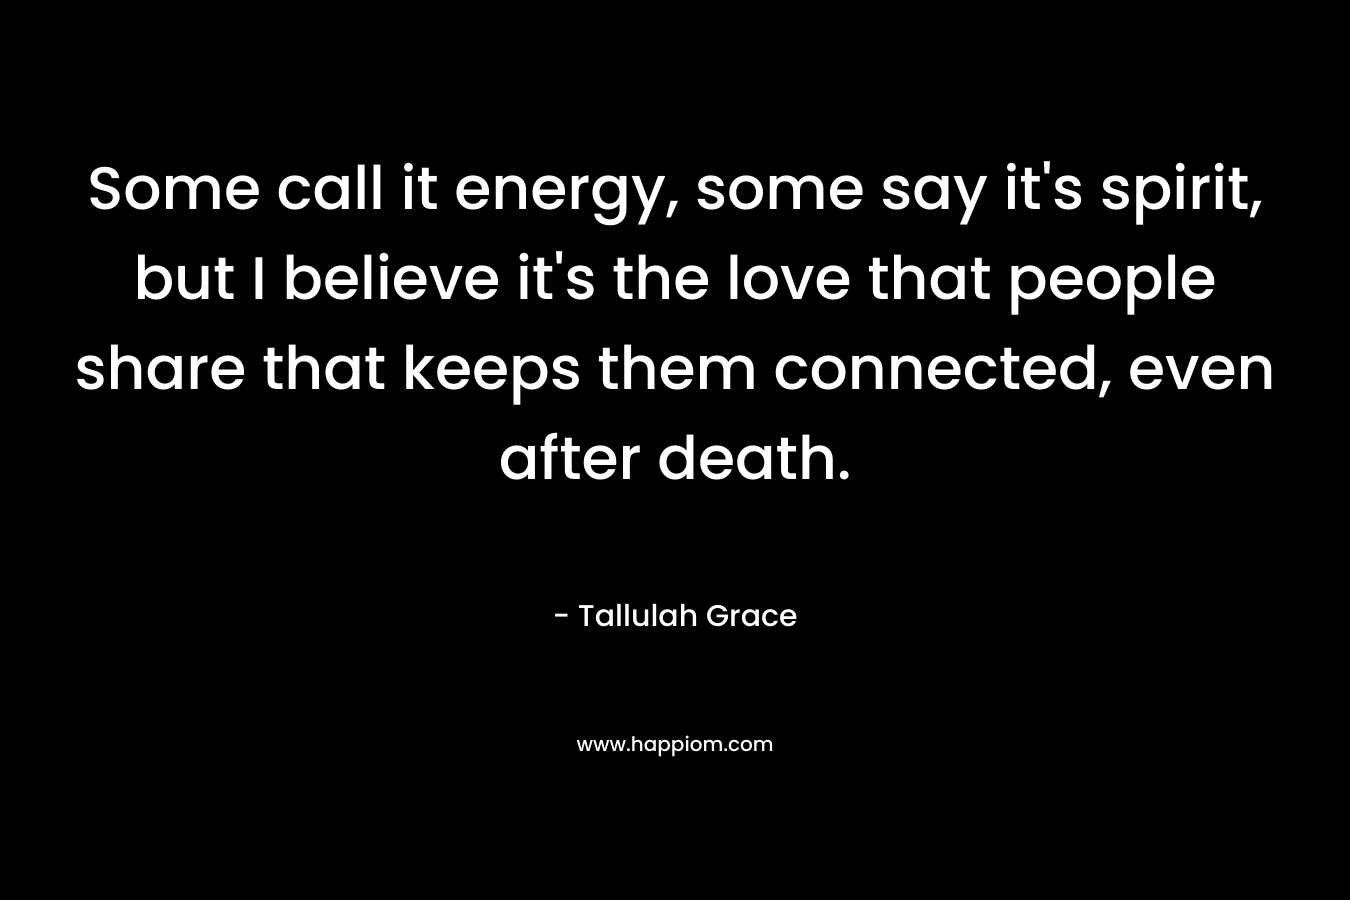 Some call it energy, some say it’s spirit, but I believe it’s the love that people share that keeps them connected, even after death. – Tallulah Grace